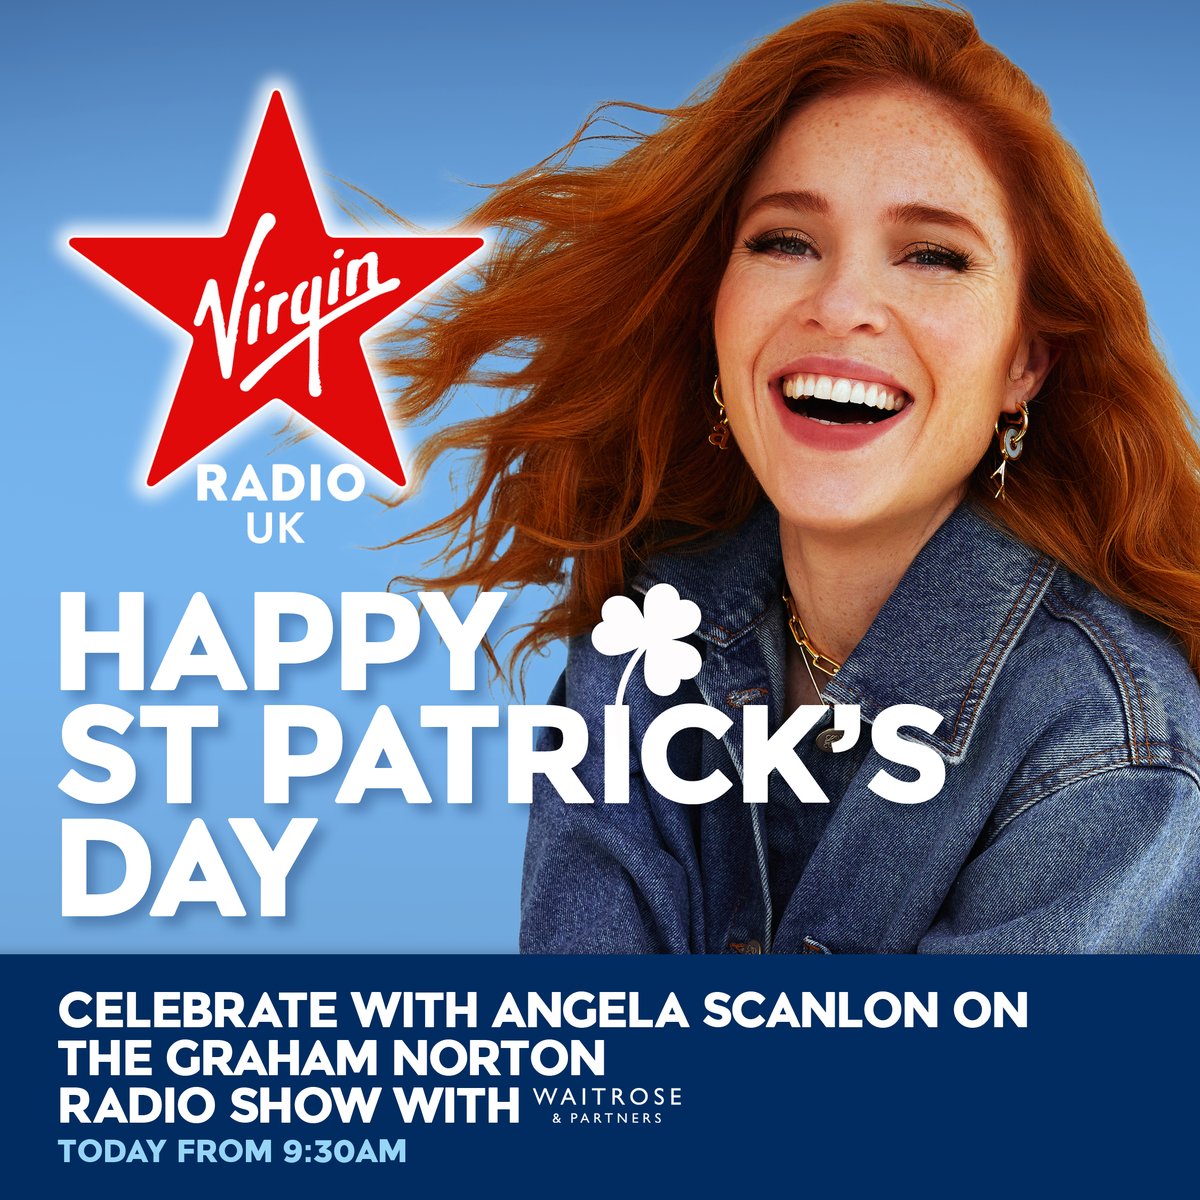 Happy St Patrick's Day from the Graham Norton Radio Show with @waitrose ☘️

Join Angela Scanlon this morning from 9.30am on Virgin Radio UK ⤵️

📻 virginradio.co.uk

@angelascanlon #AngelaScanlon #GrahamNortonRadioShow #StPatricksDay #VirginRadioUK